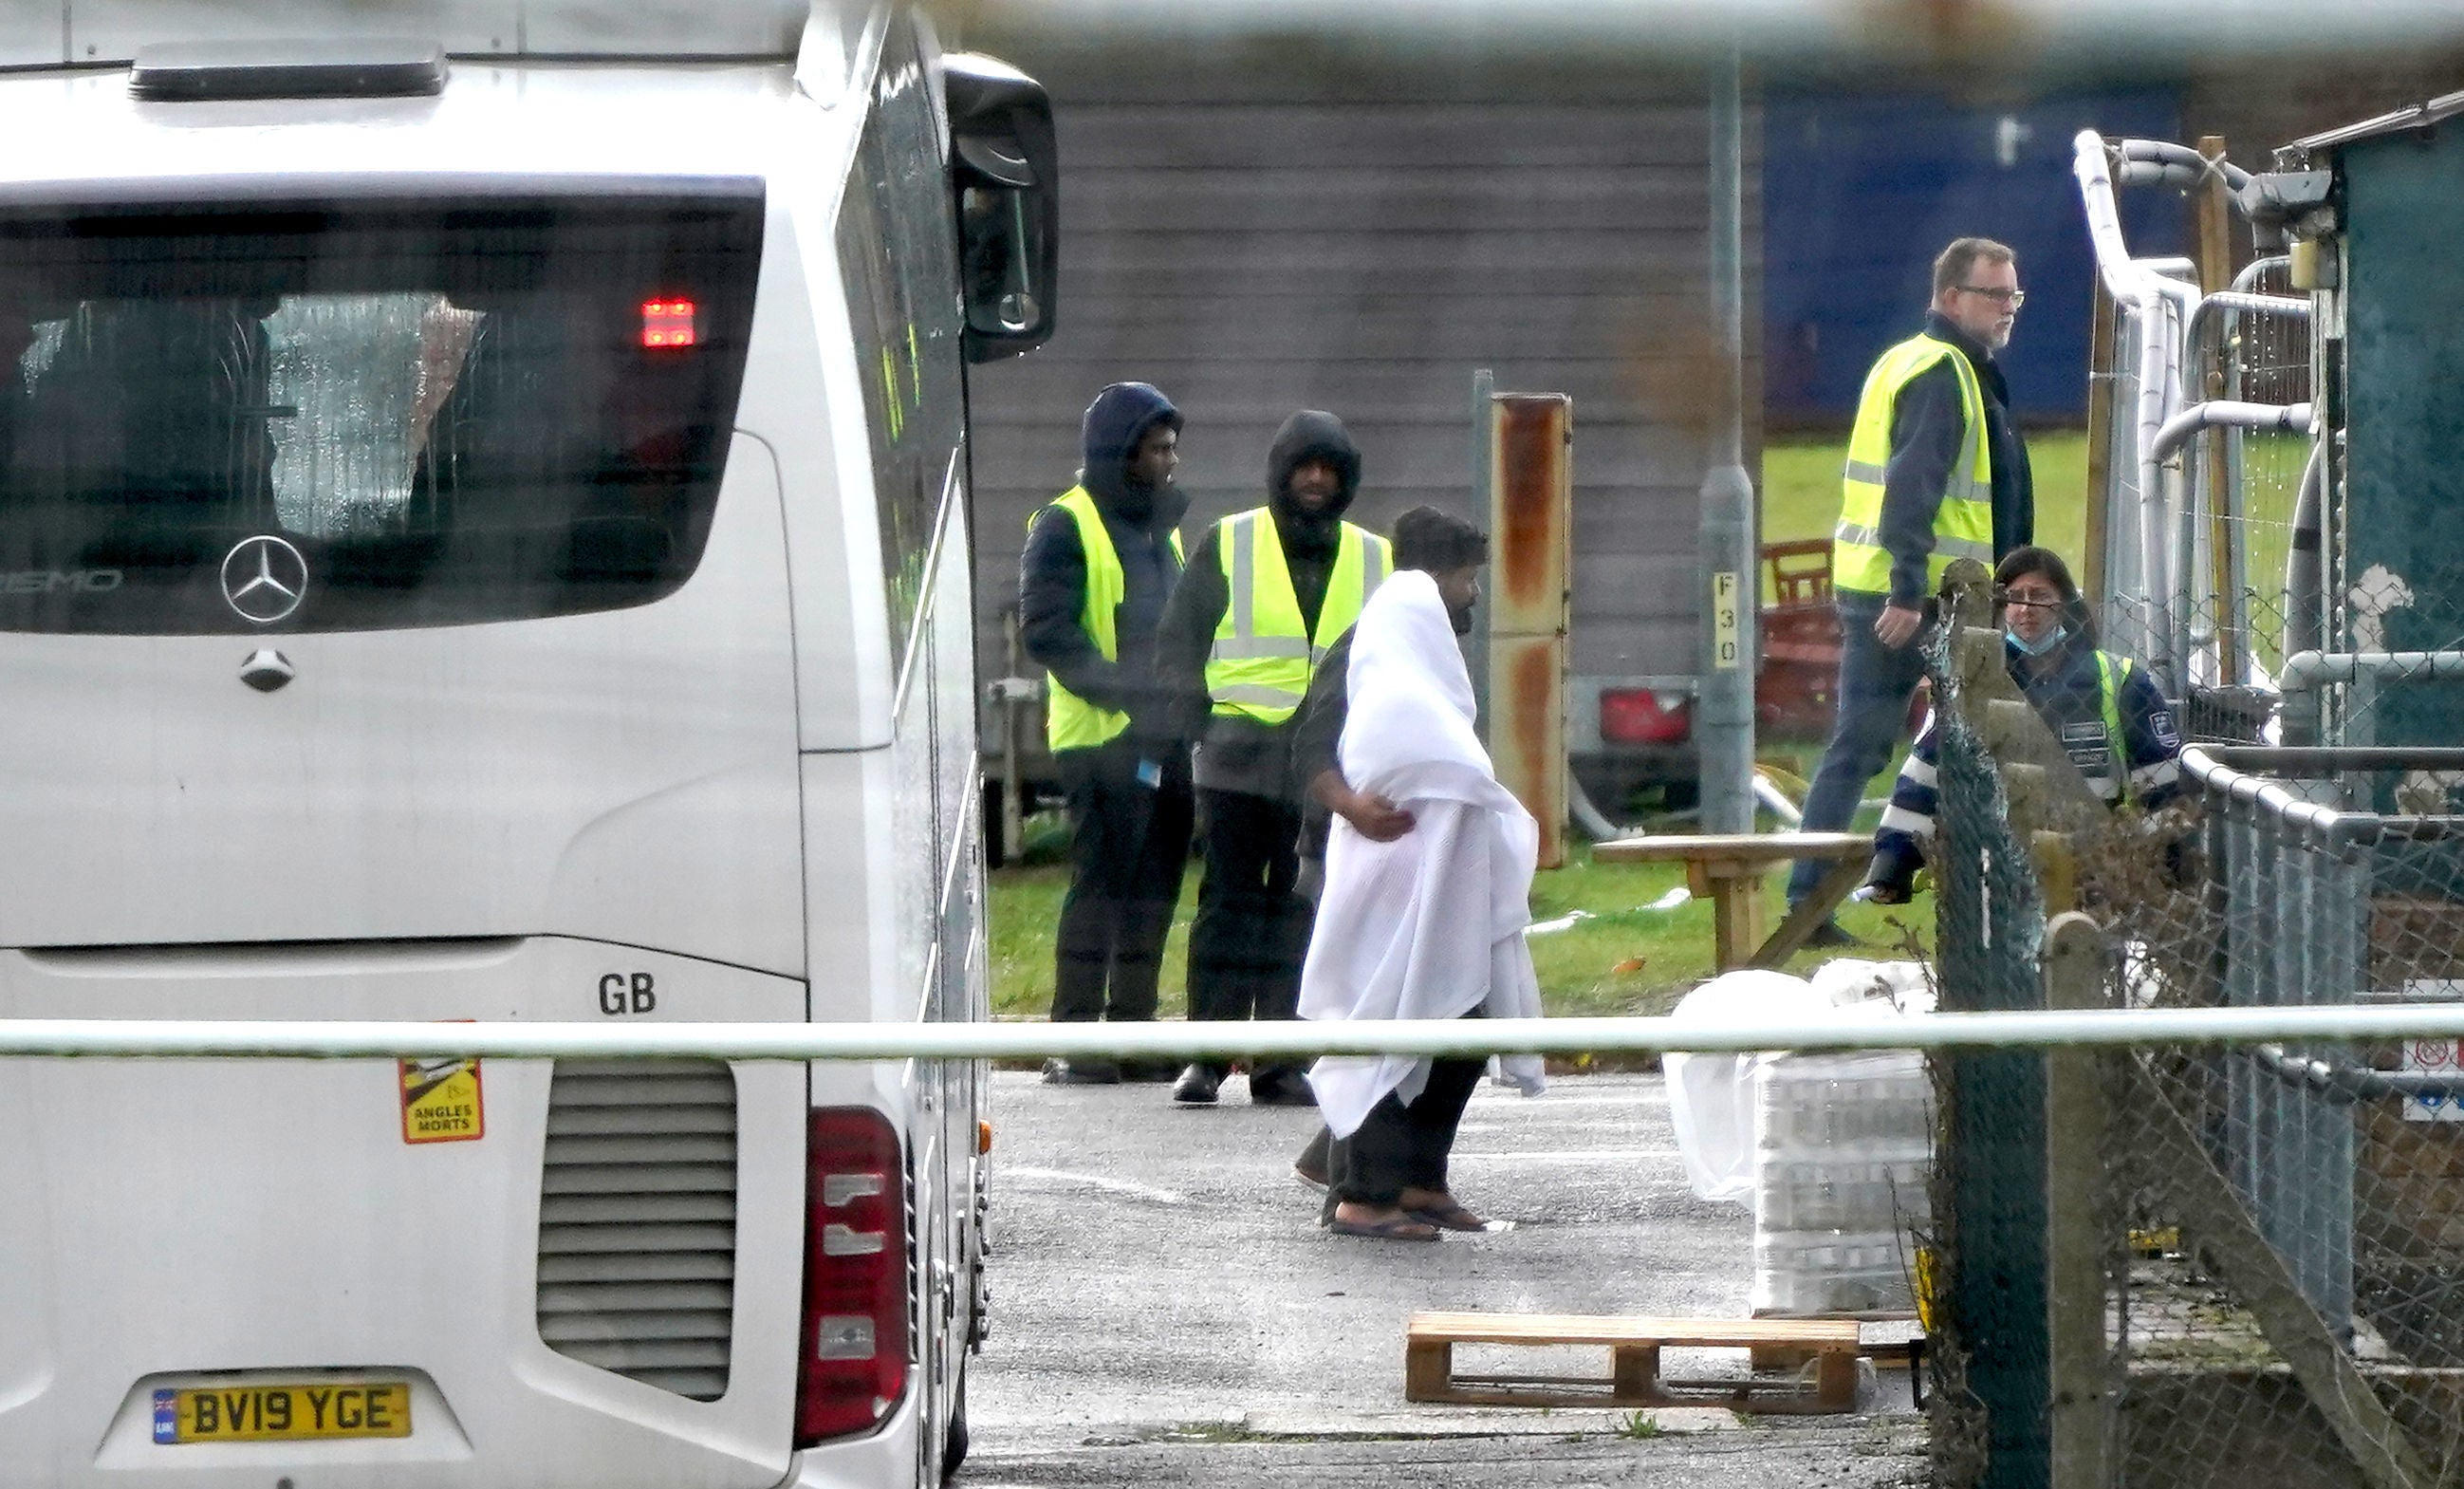 People thought to be migrants at the Manston immigration short-term holding facility